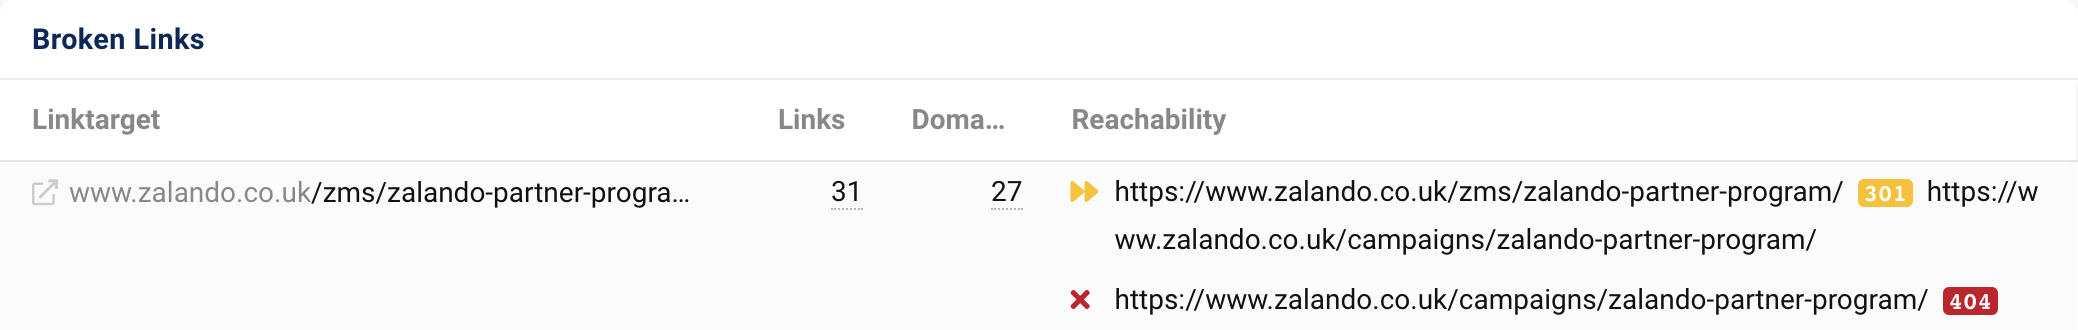 The link target zalando.co.uk/zms/zalando-partner-program/ gets 31 links from 27 domains. After a 301 redirect, the URL outputs a 404 status code.